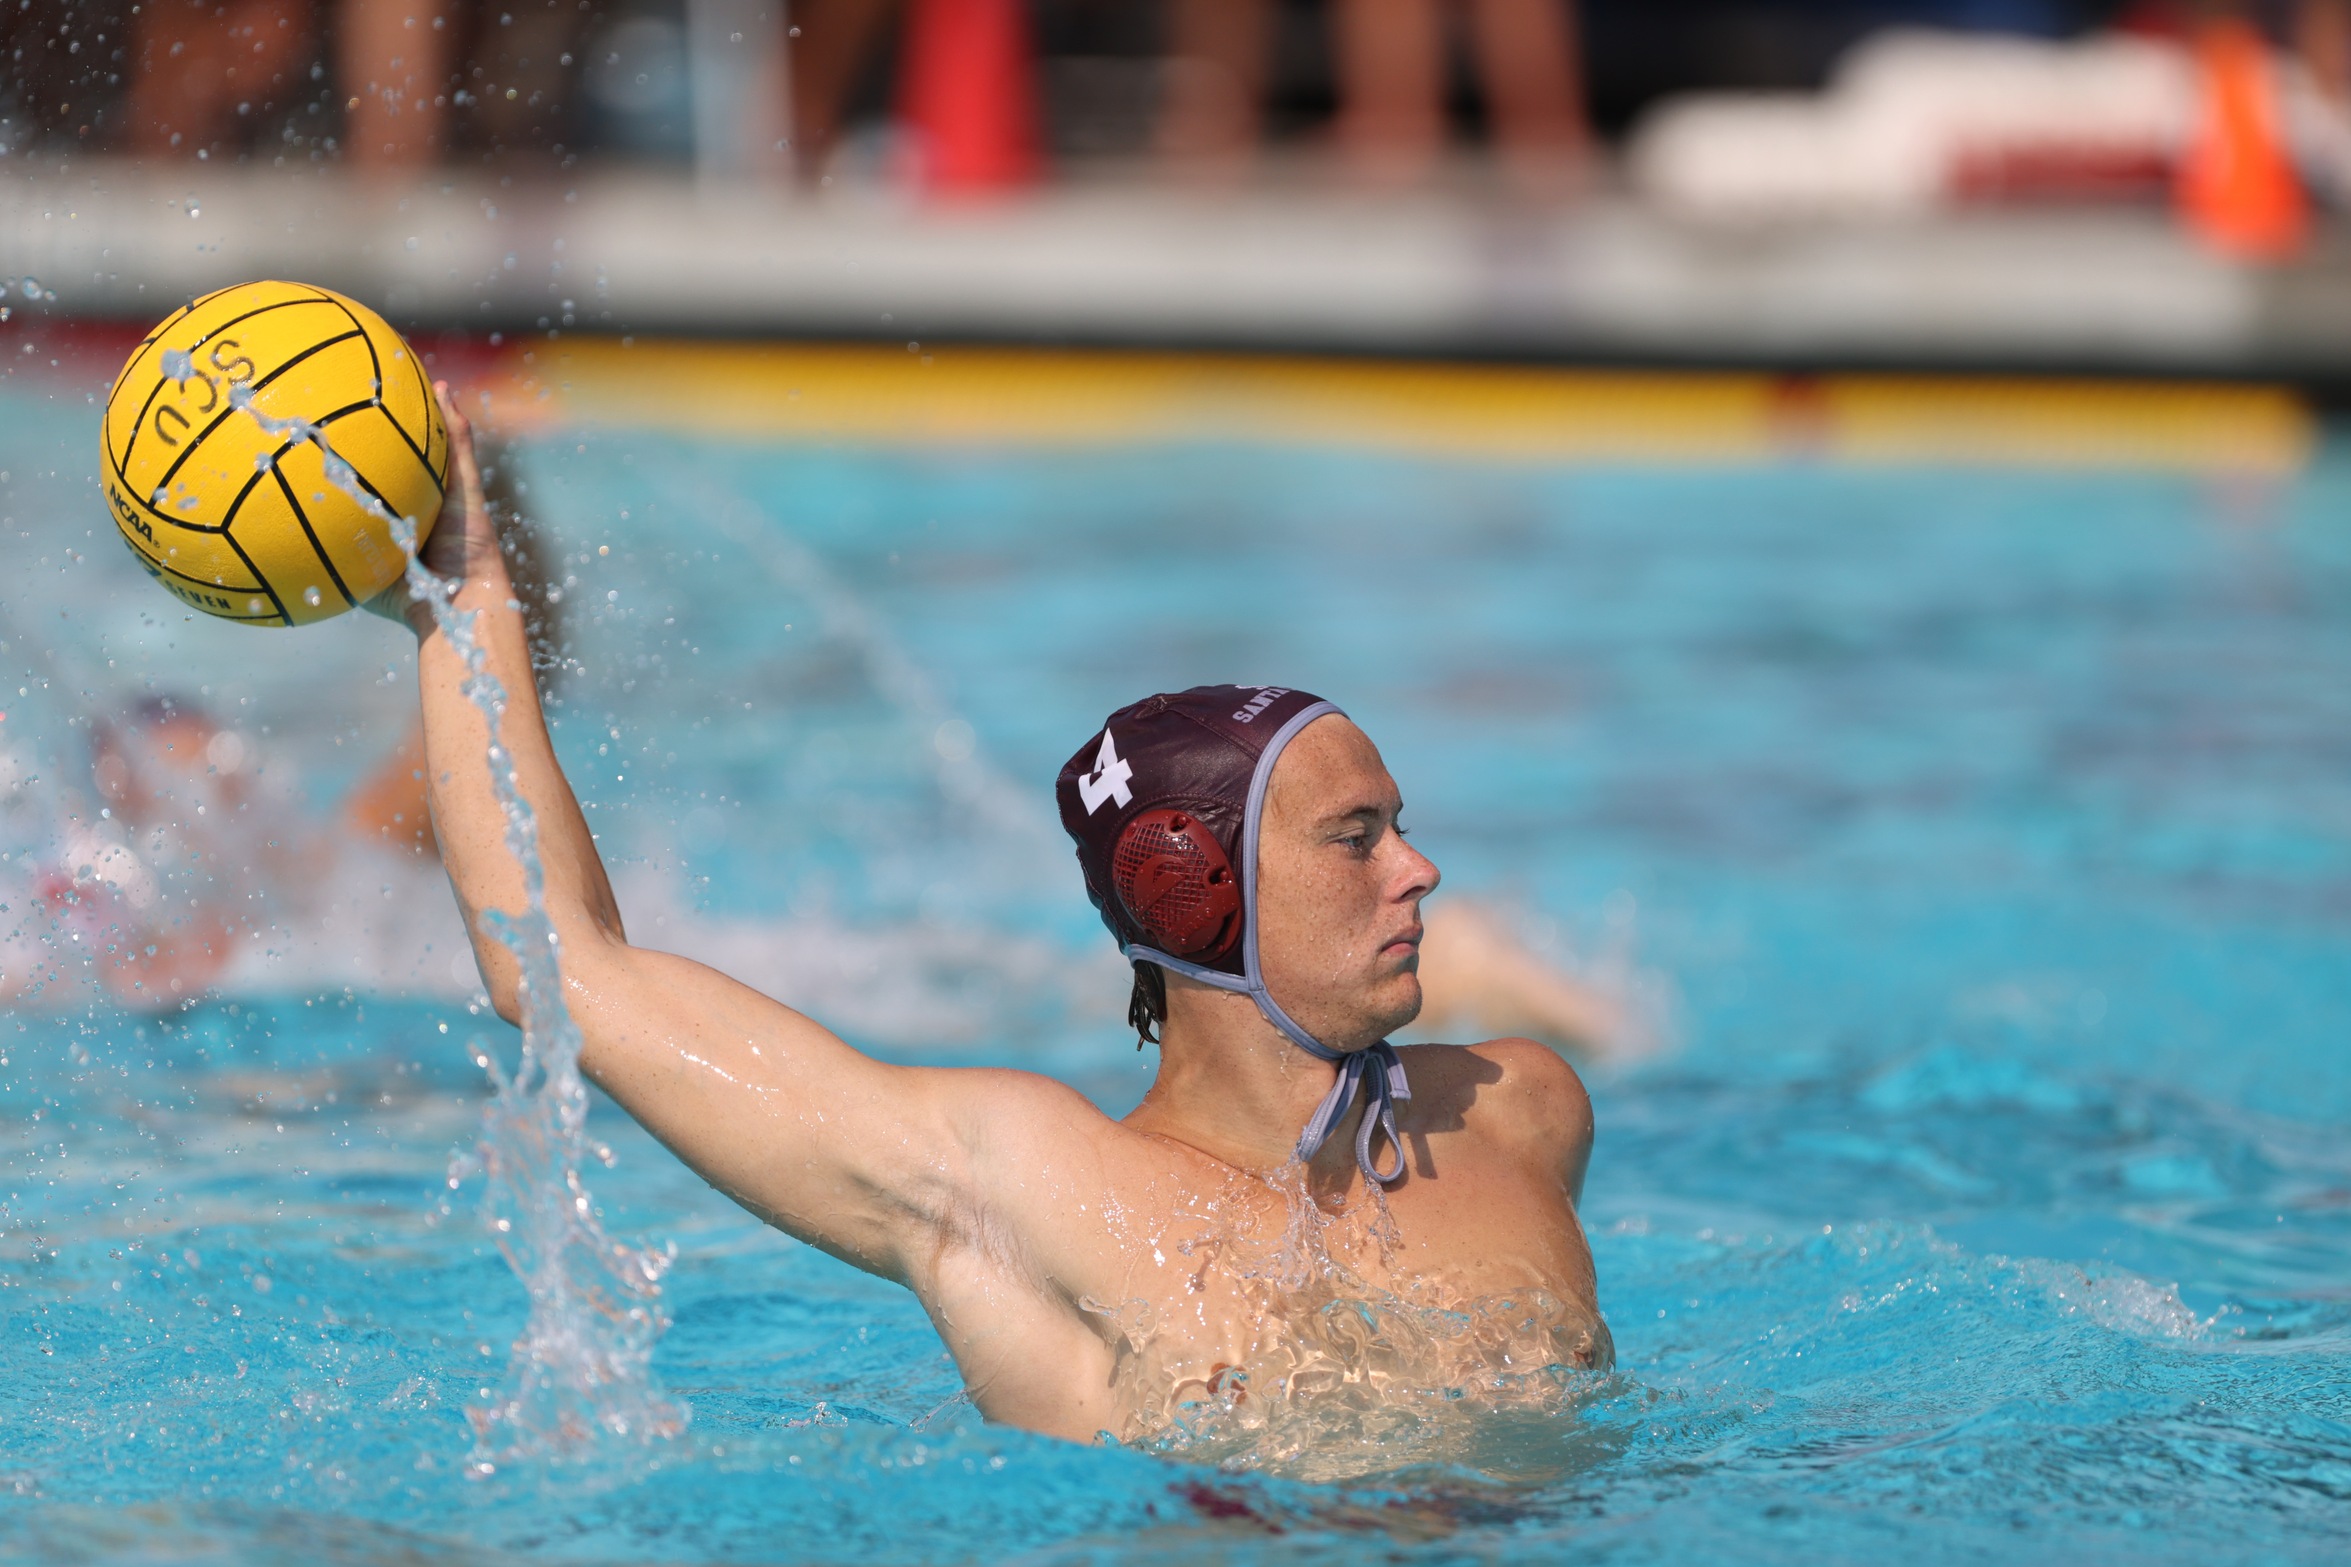 Broncos Put Up Great Fight In WWPA Championship Semifinal